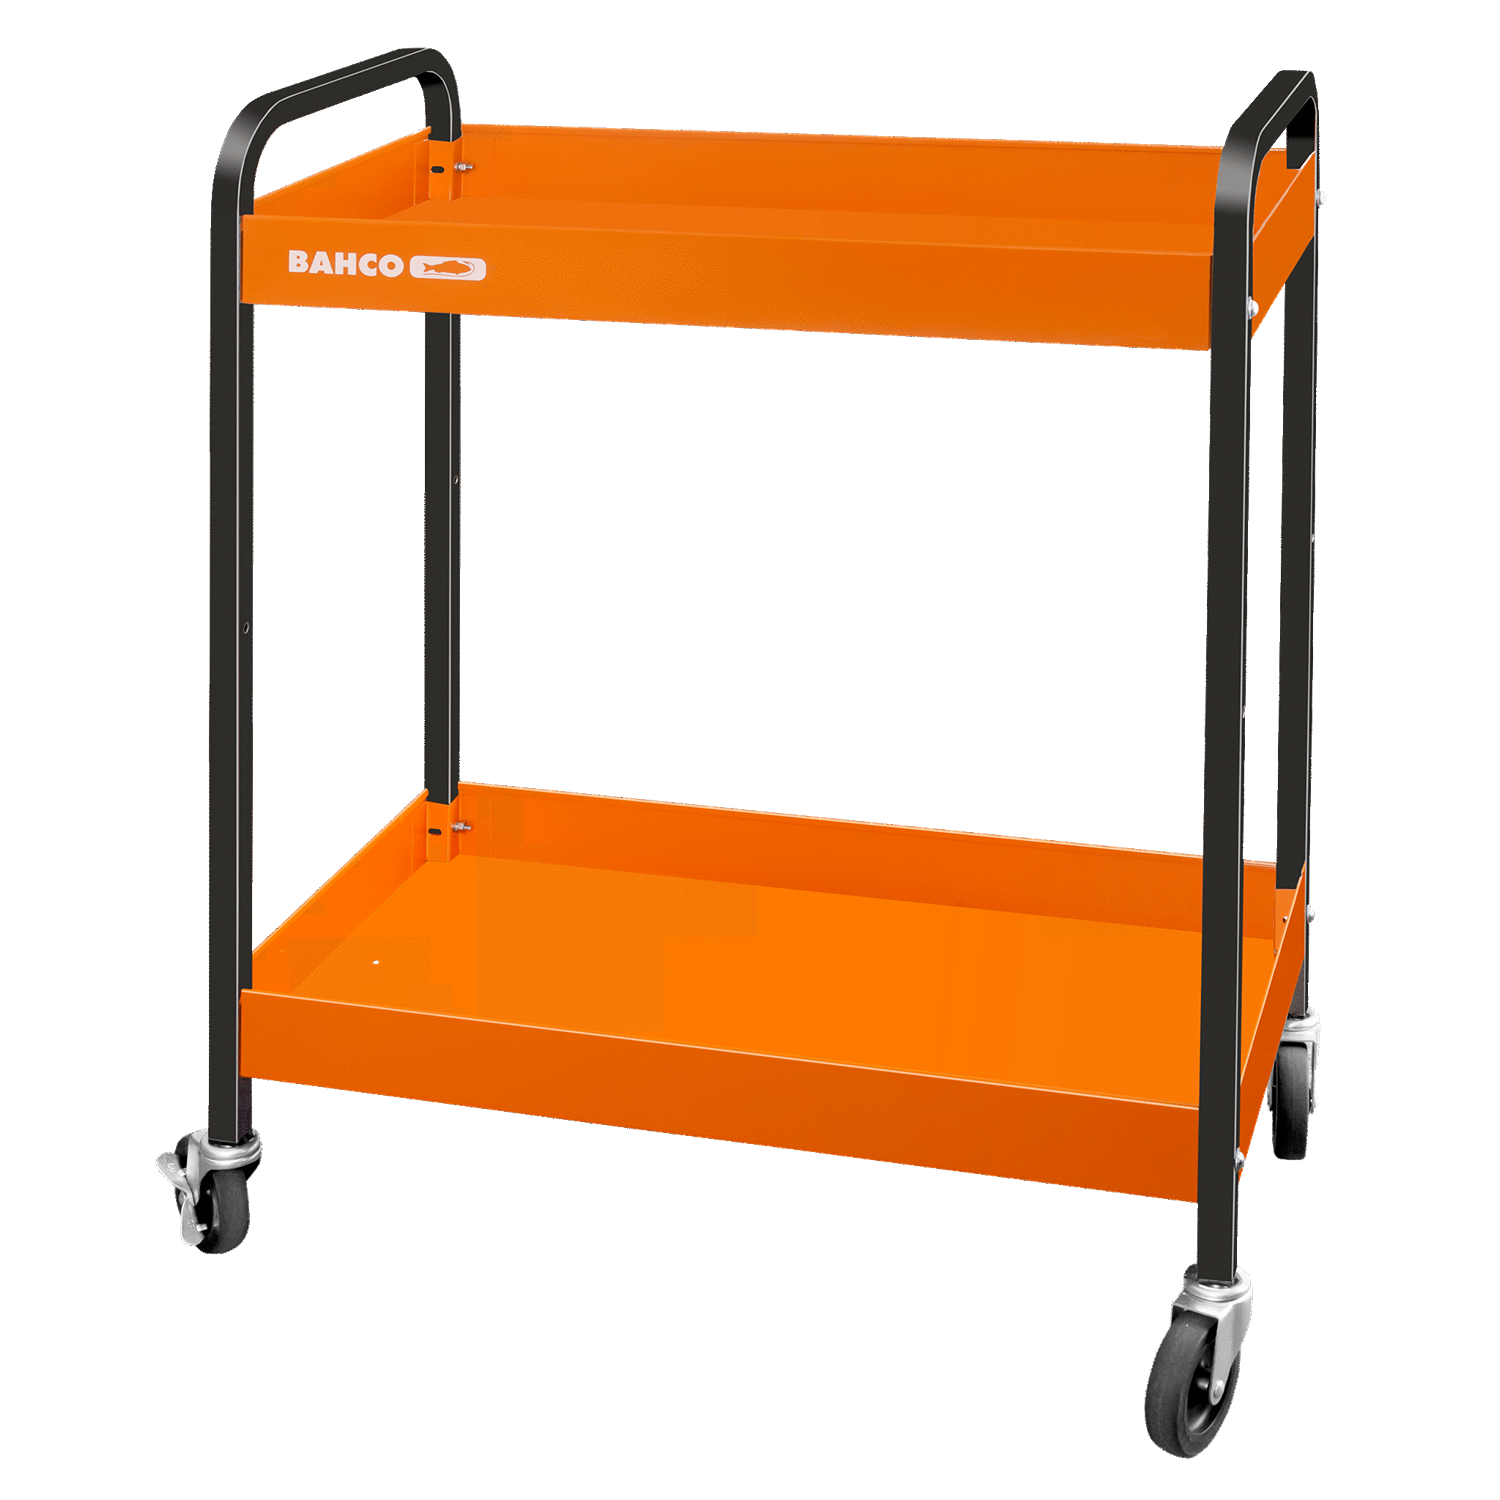 BAHCO 1470KC2 Two Tray Steel Roll Carts (BAHCO Tools) - Premium Roll Carts from BAHCO - Shop now at Yew Aik.